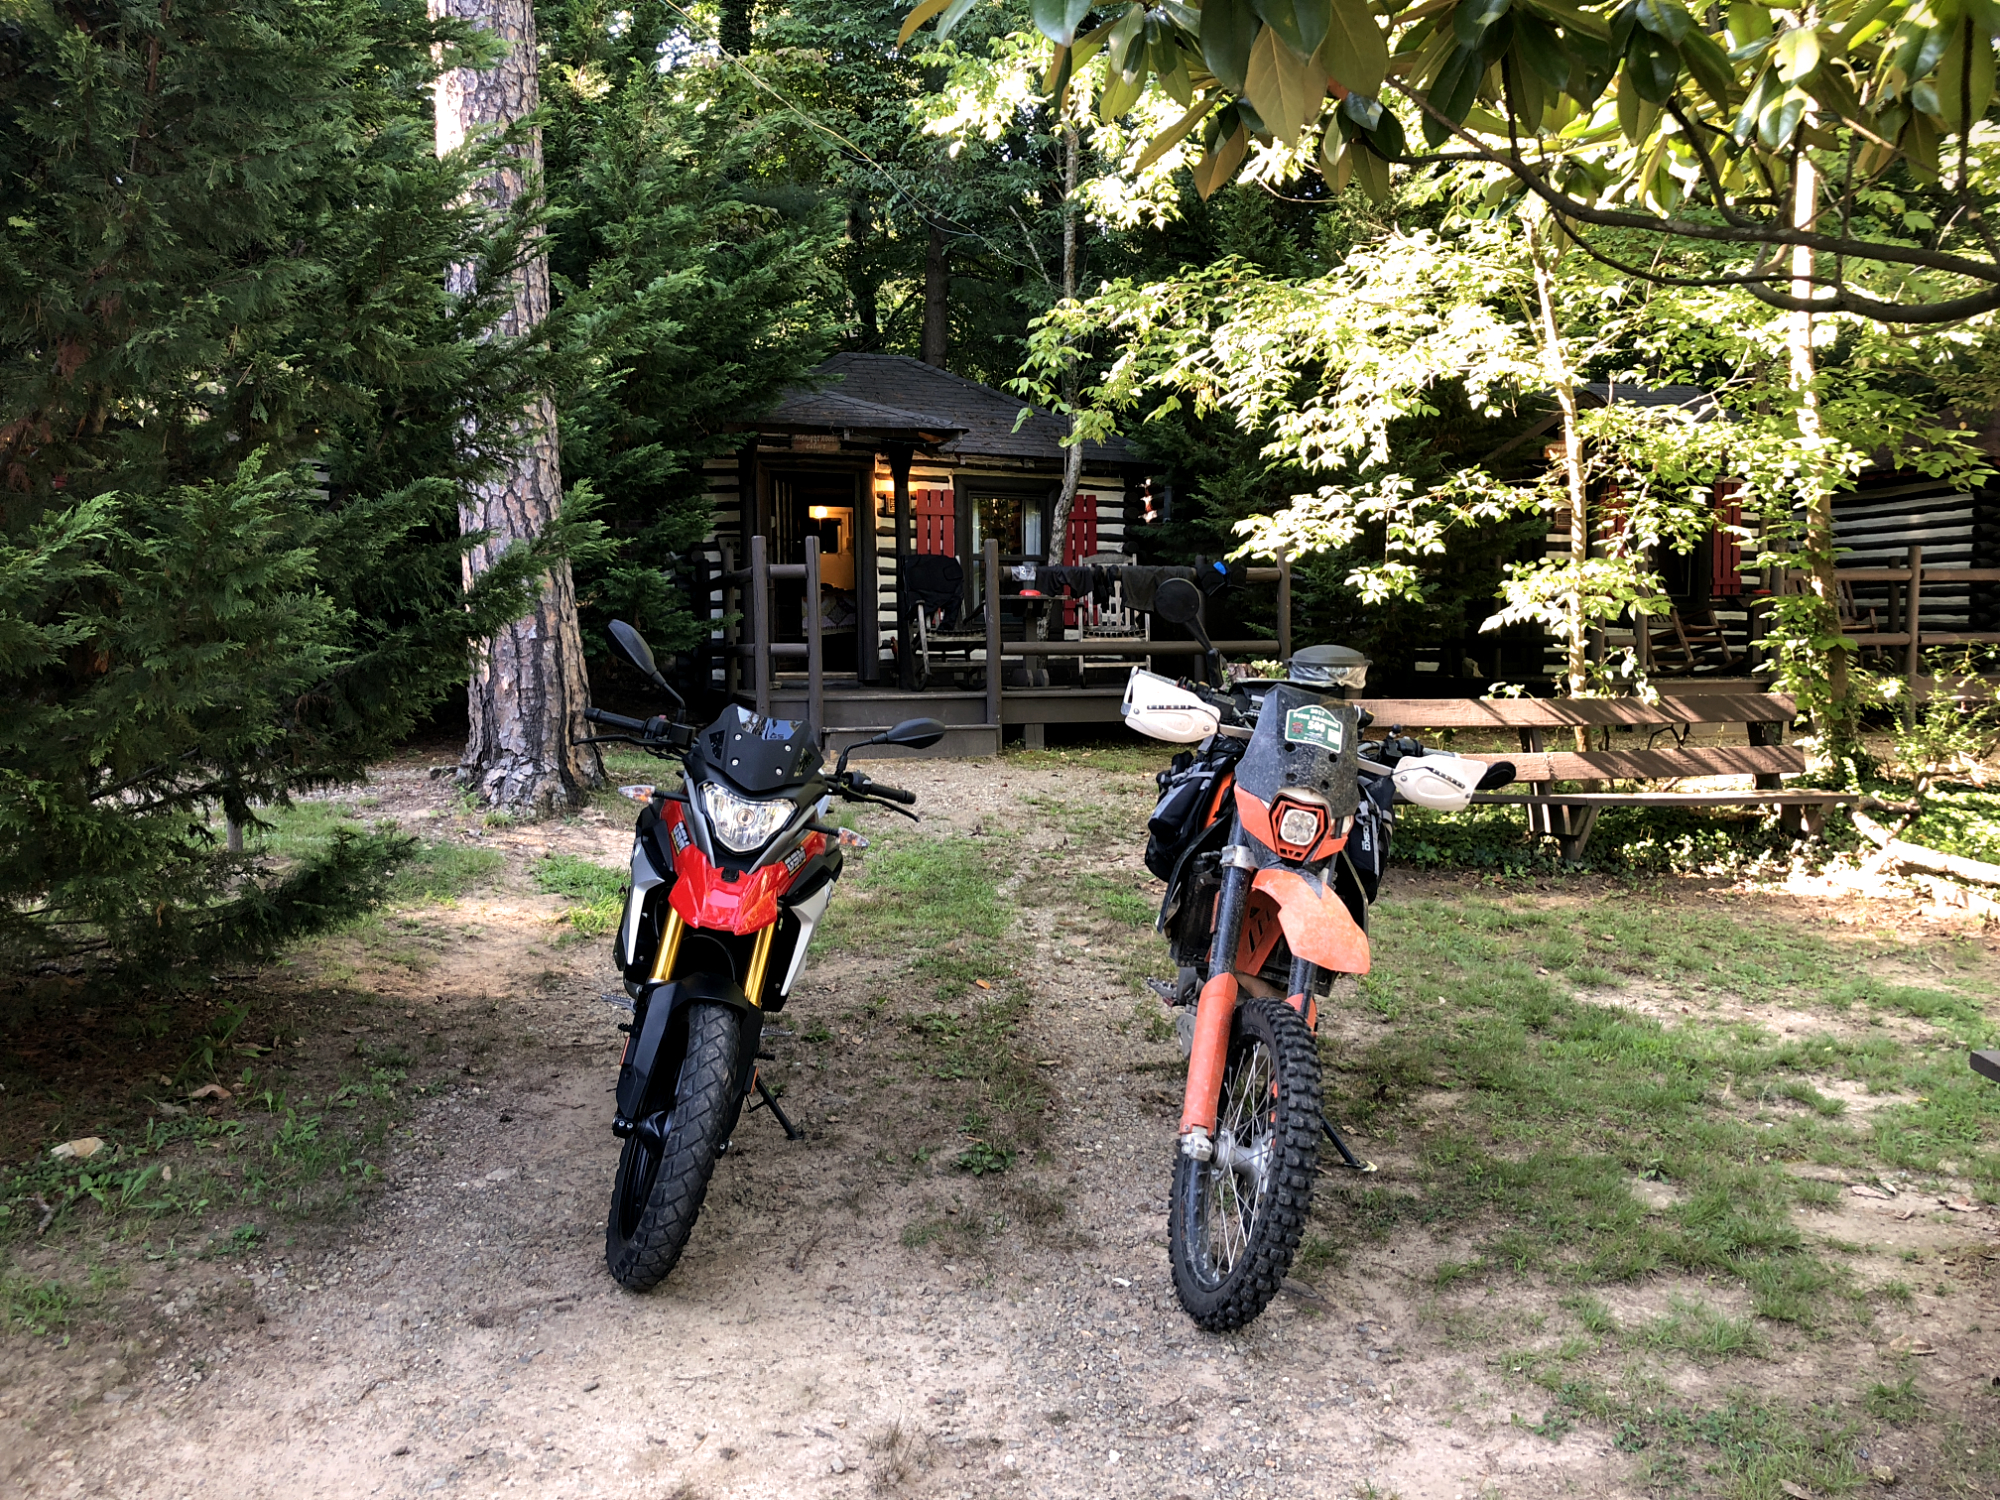 Our bikes at the cabin